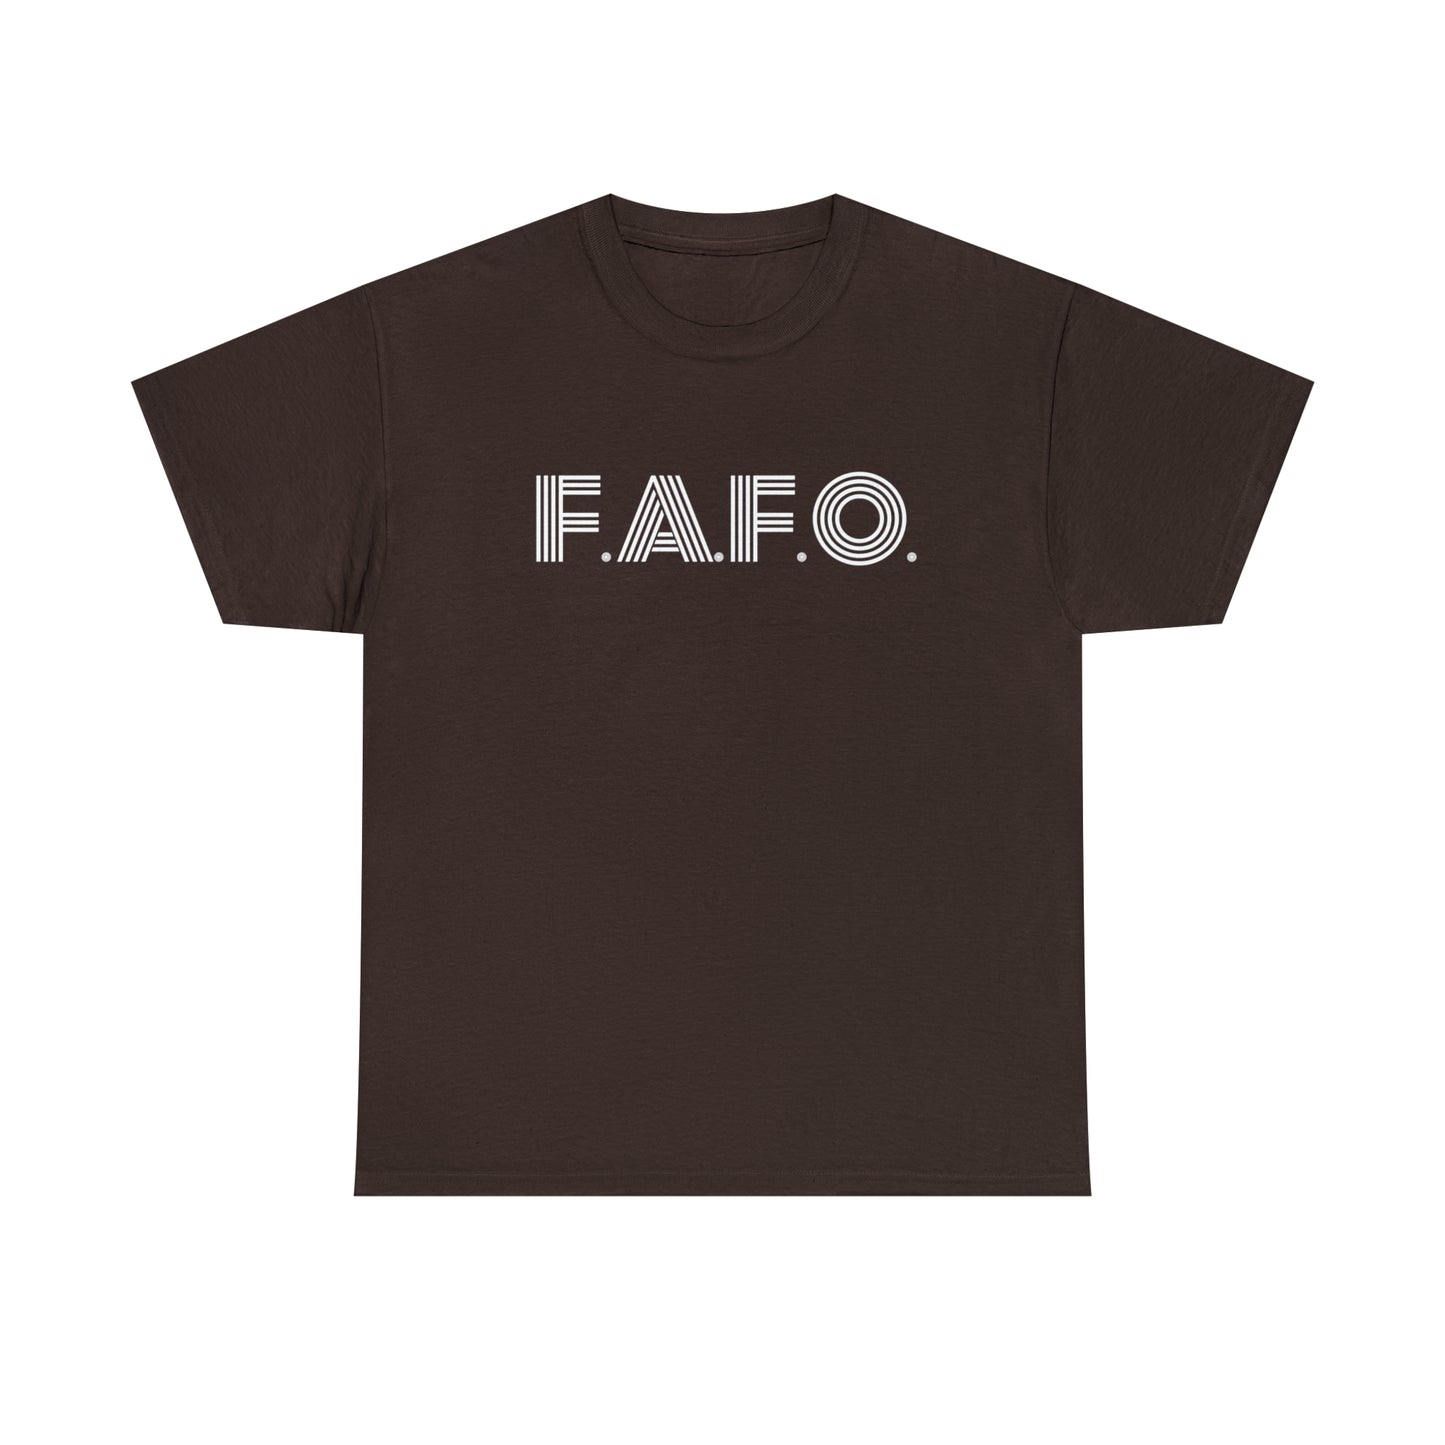 FAFO T-Shirt For Fuck Around And Find Out TShirt For Sarcastic T Shirt For Don't Push Your Luck Shirt